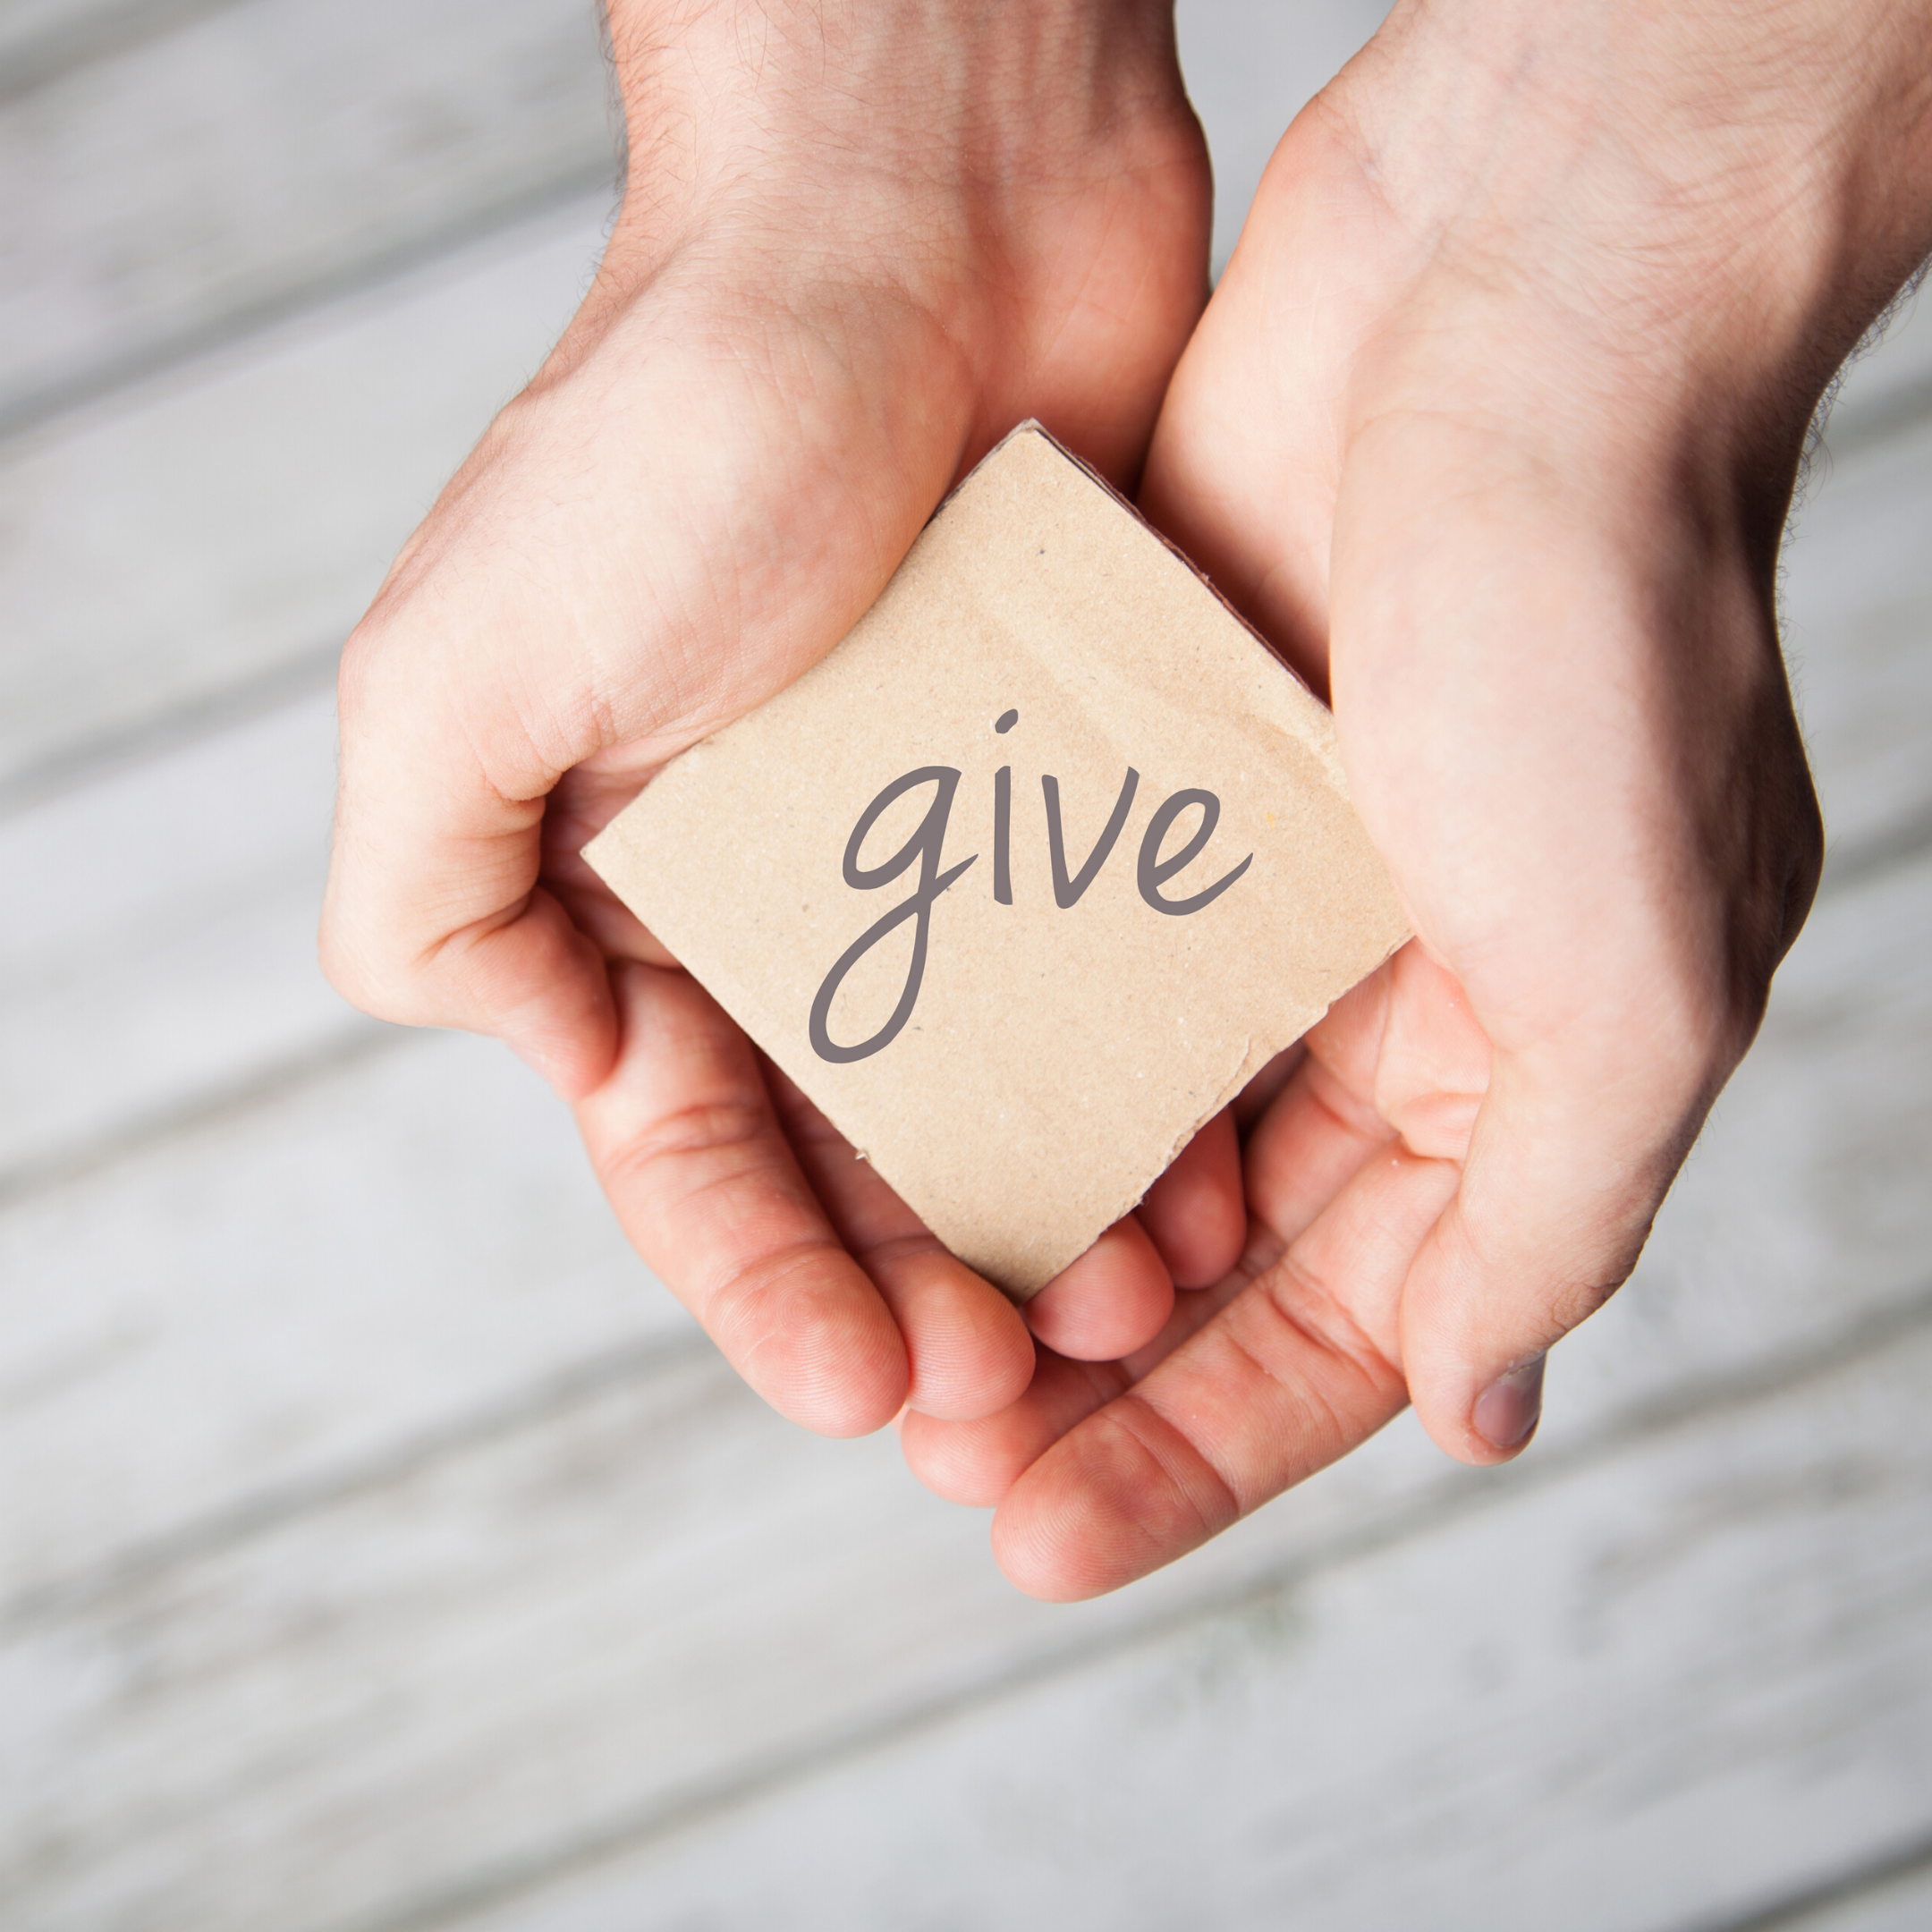 charitable giving during the pandemic with crystal clear finances